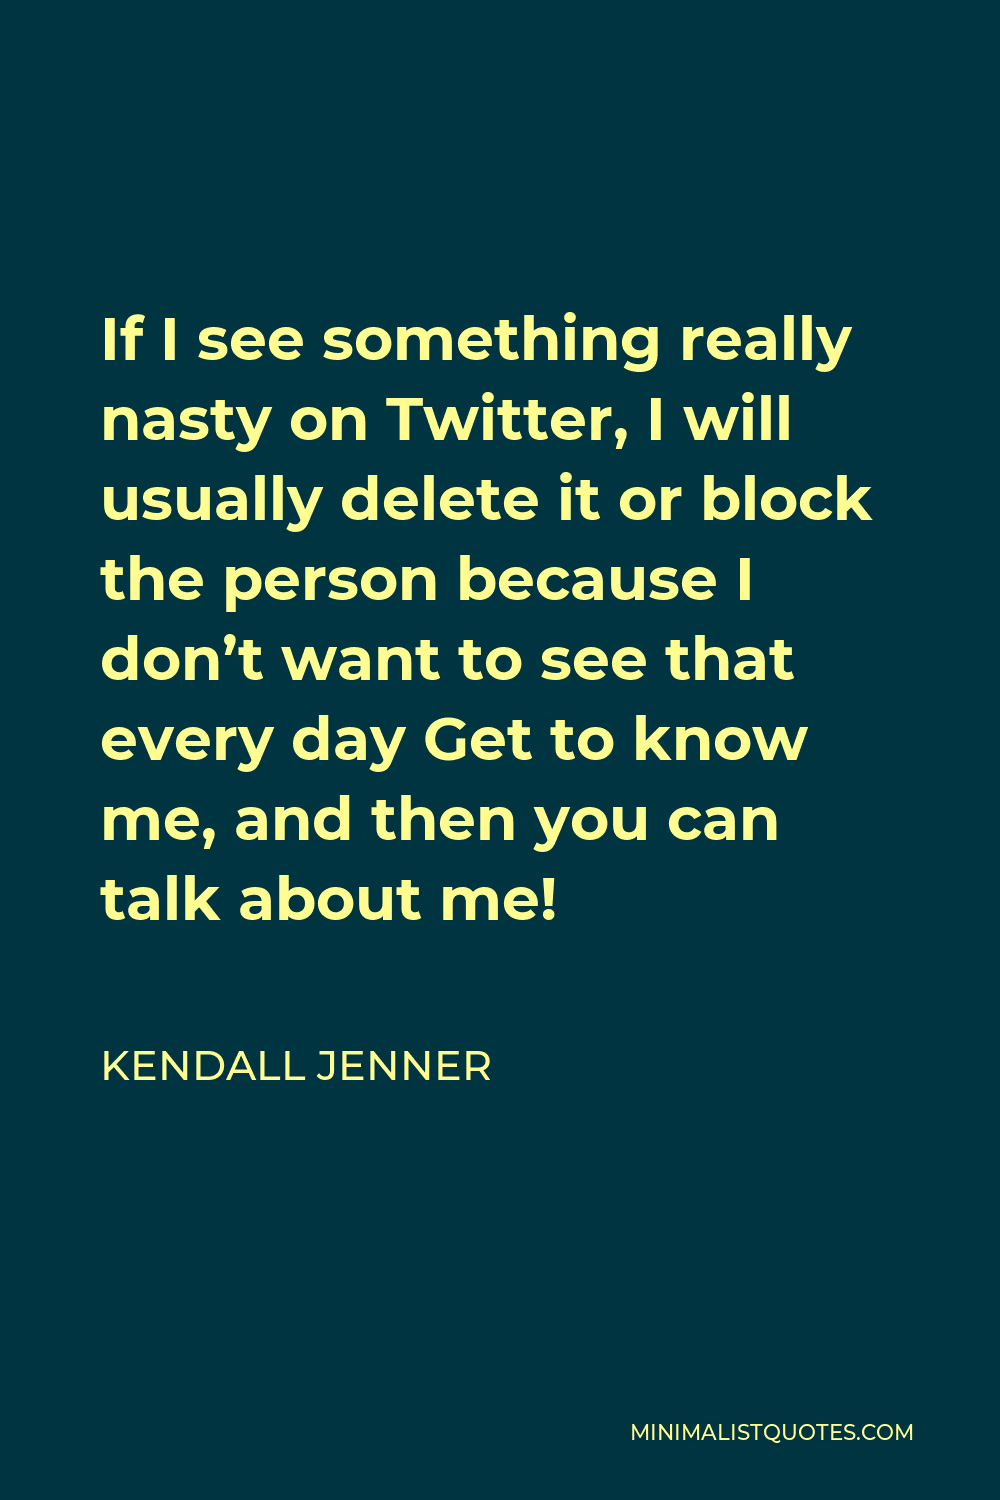 Kendall Jenner Quote - If I see something really nasty on Twitter, I will usually delete it or block the person because I don’t want to see that every day Get to know me, and then you can talk about me!